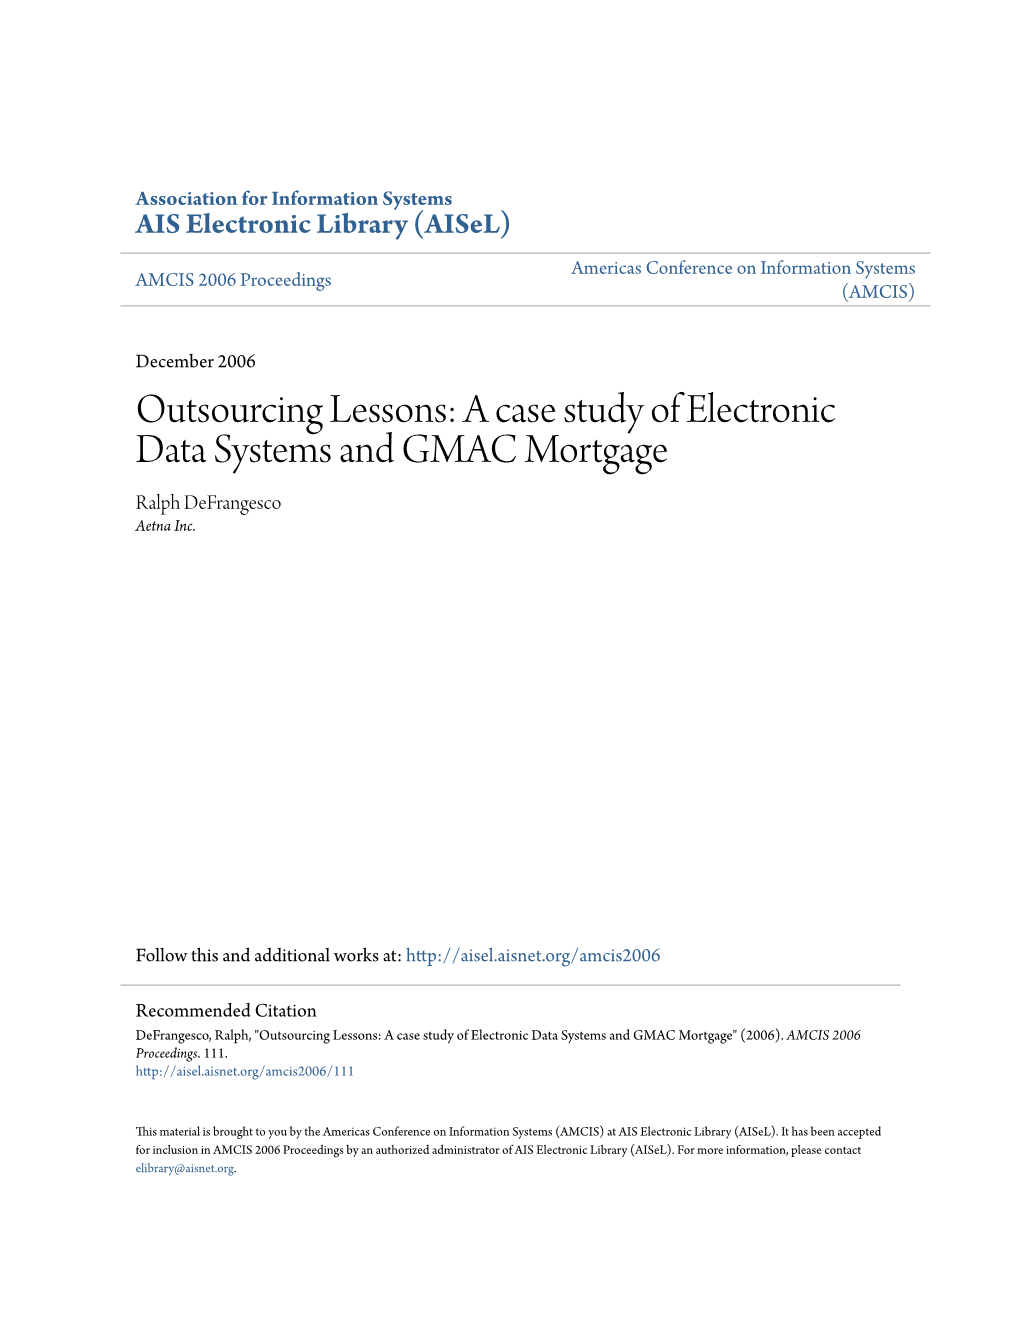 Outsourcing Lessons: a Case Study of Electronic Data Systems and GMAC Mortgage Ralph Defrangesco Aetna Inc